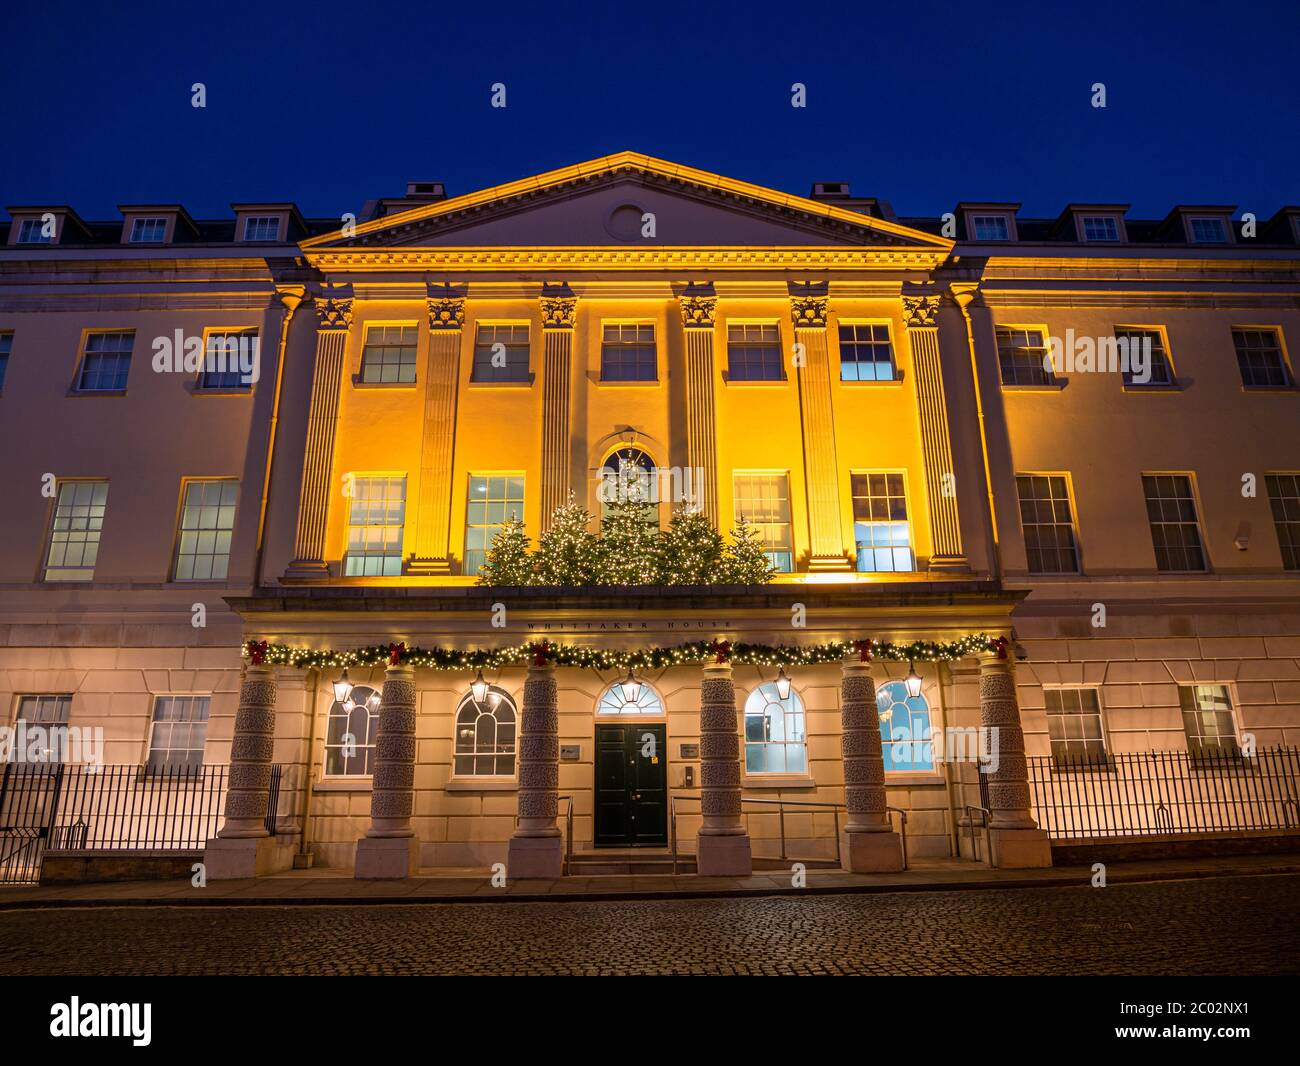 Richmond, London, United Kingdom - December 4, 2019: Famous building Whittaker House of Business Professional Consultants in Richmond Upon Thames Stock Photo